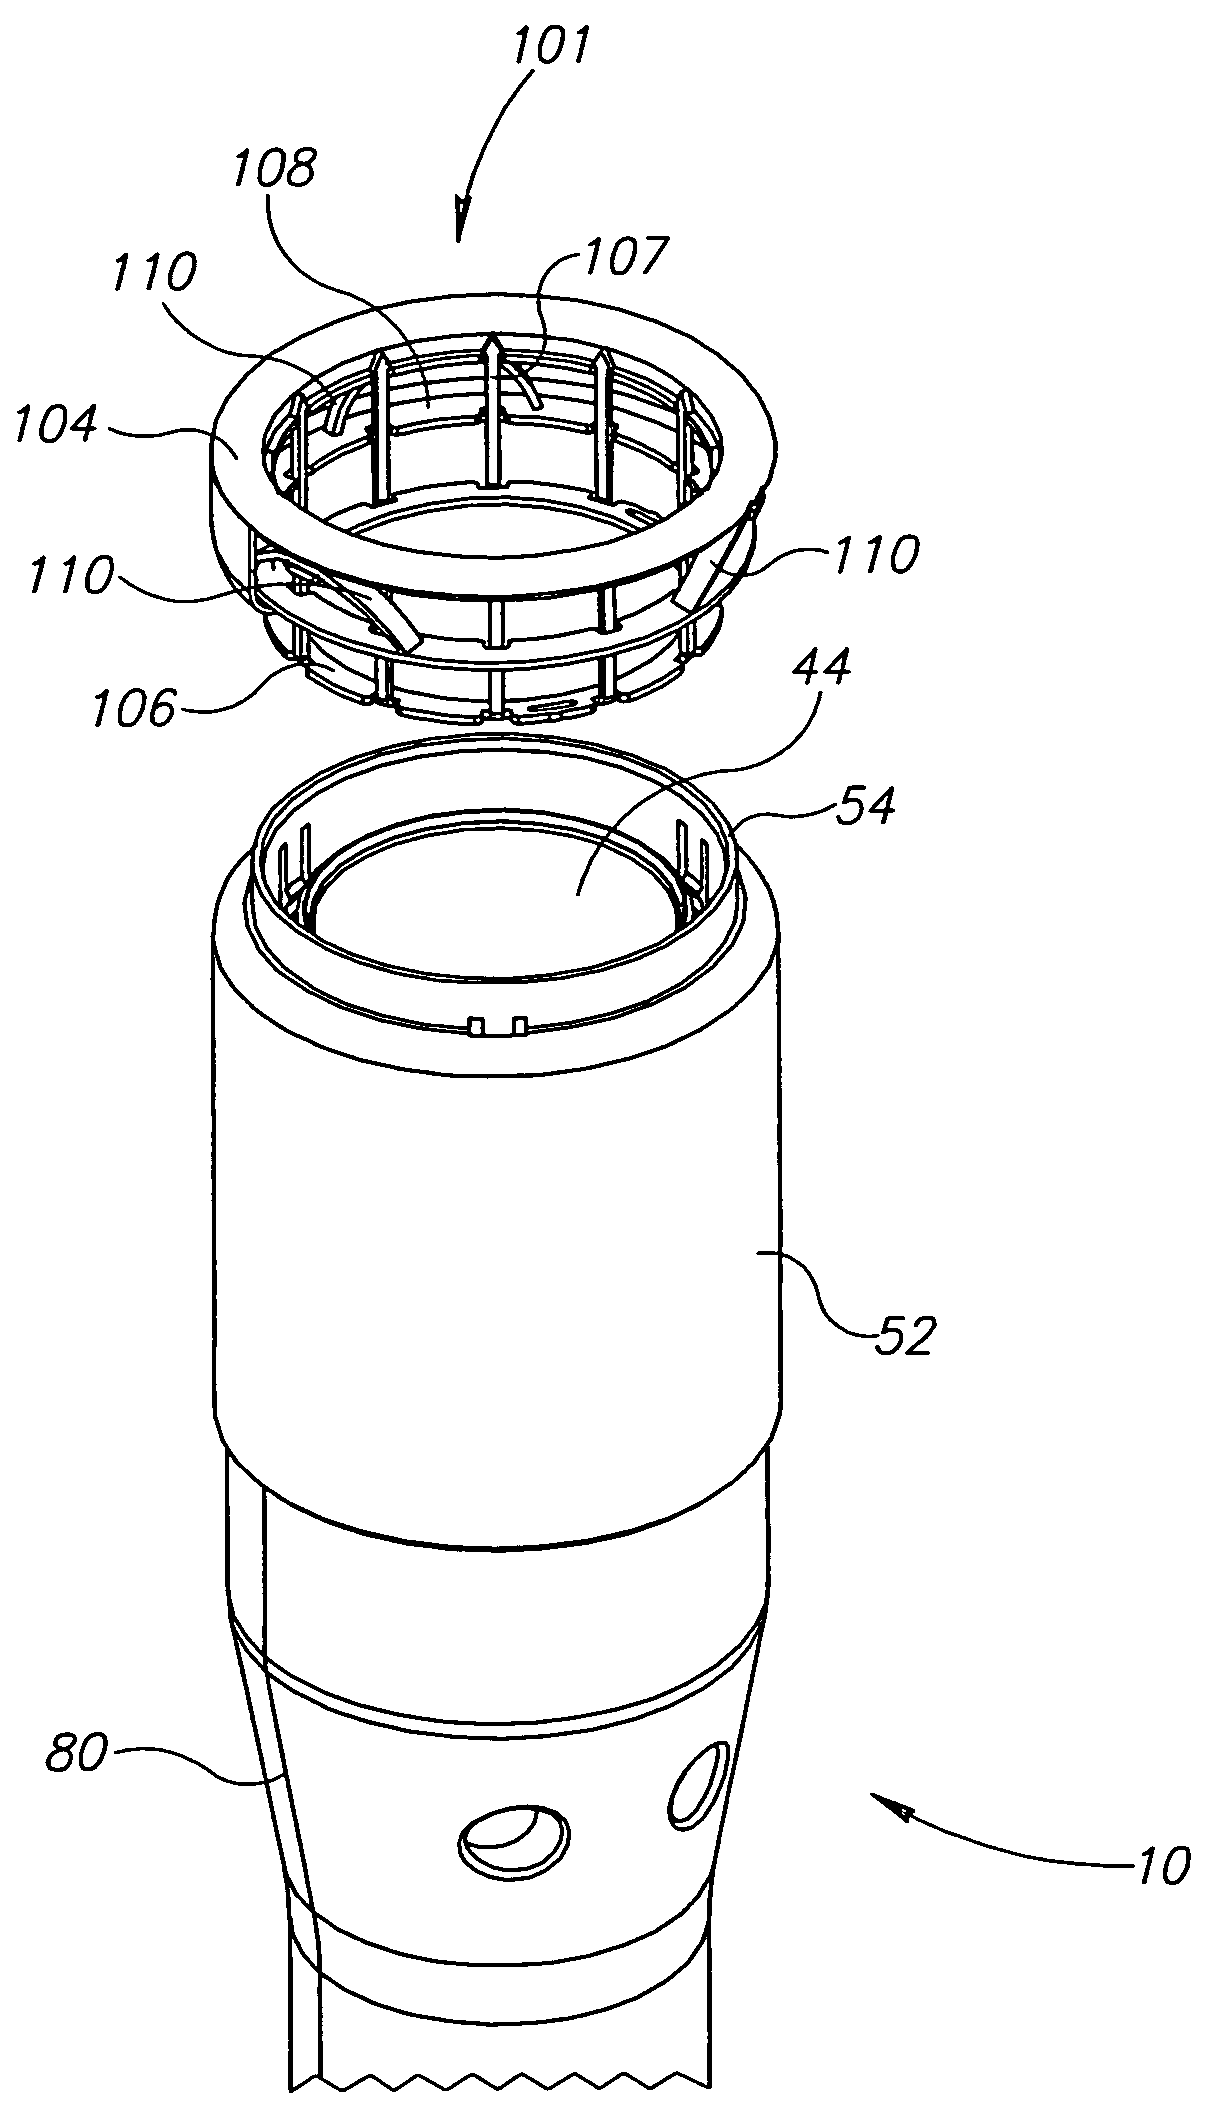 Compression anastomosis ring assembly and applicator for use therewith